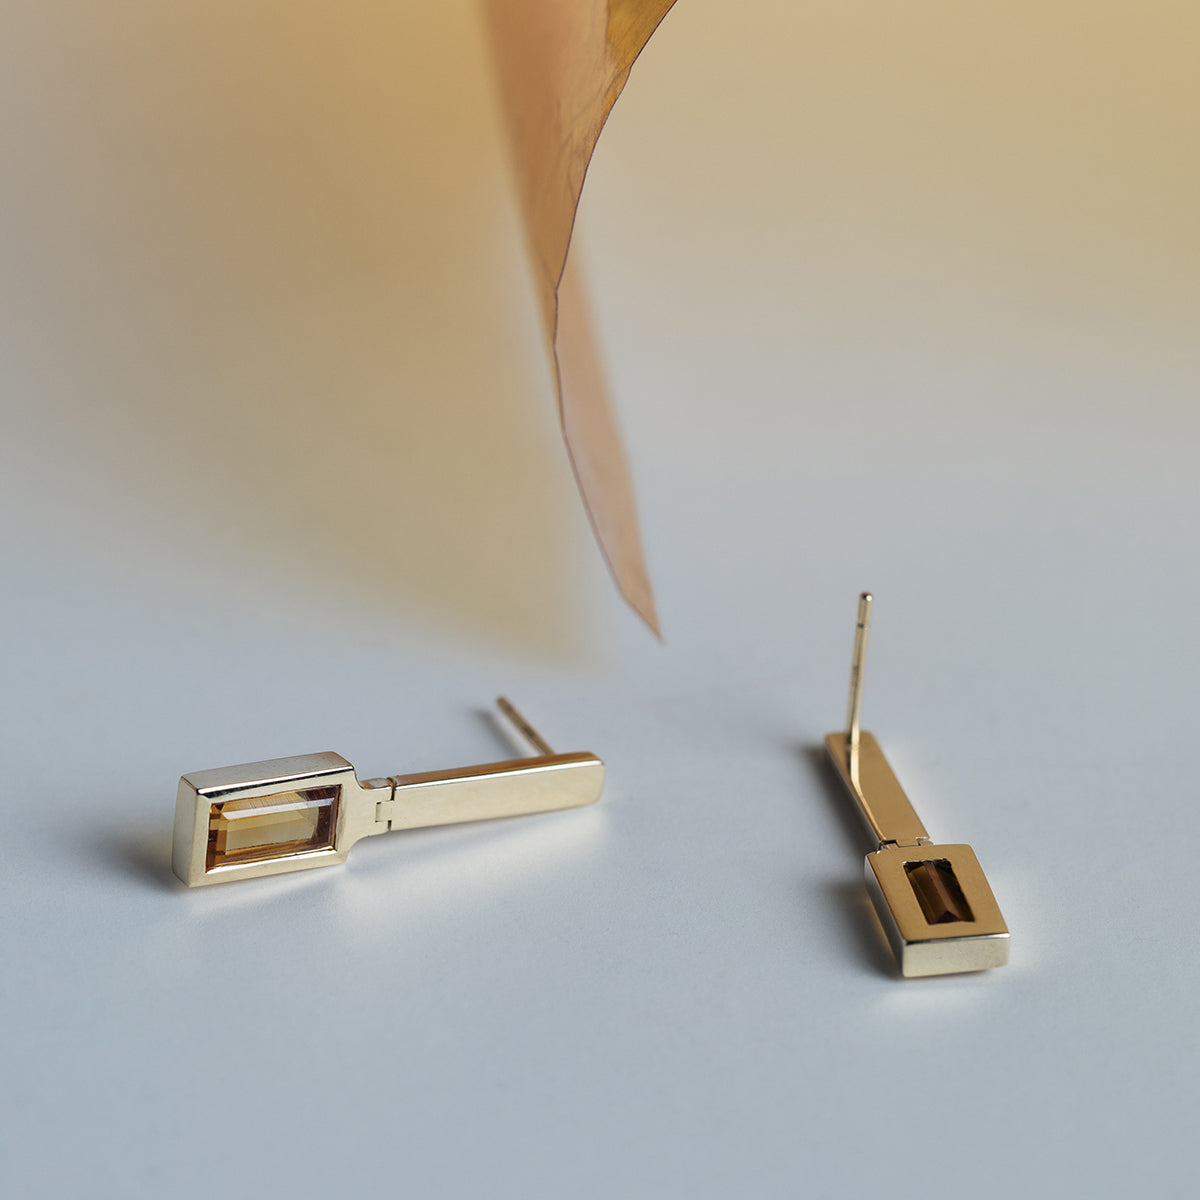 Designer Amy Earrings 14k Yellow Gold Set With Precious Citrine By SHW Fine Jewelry New York City